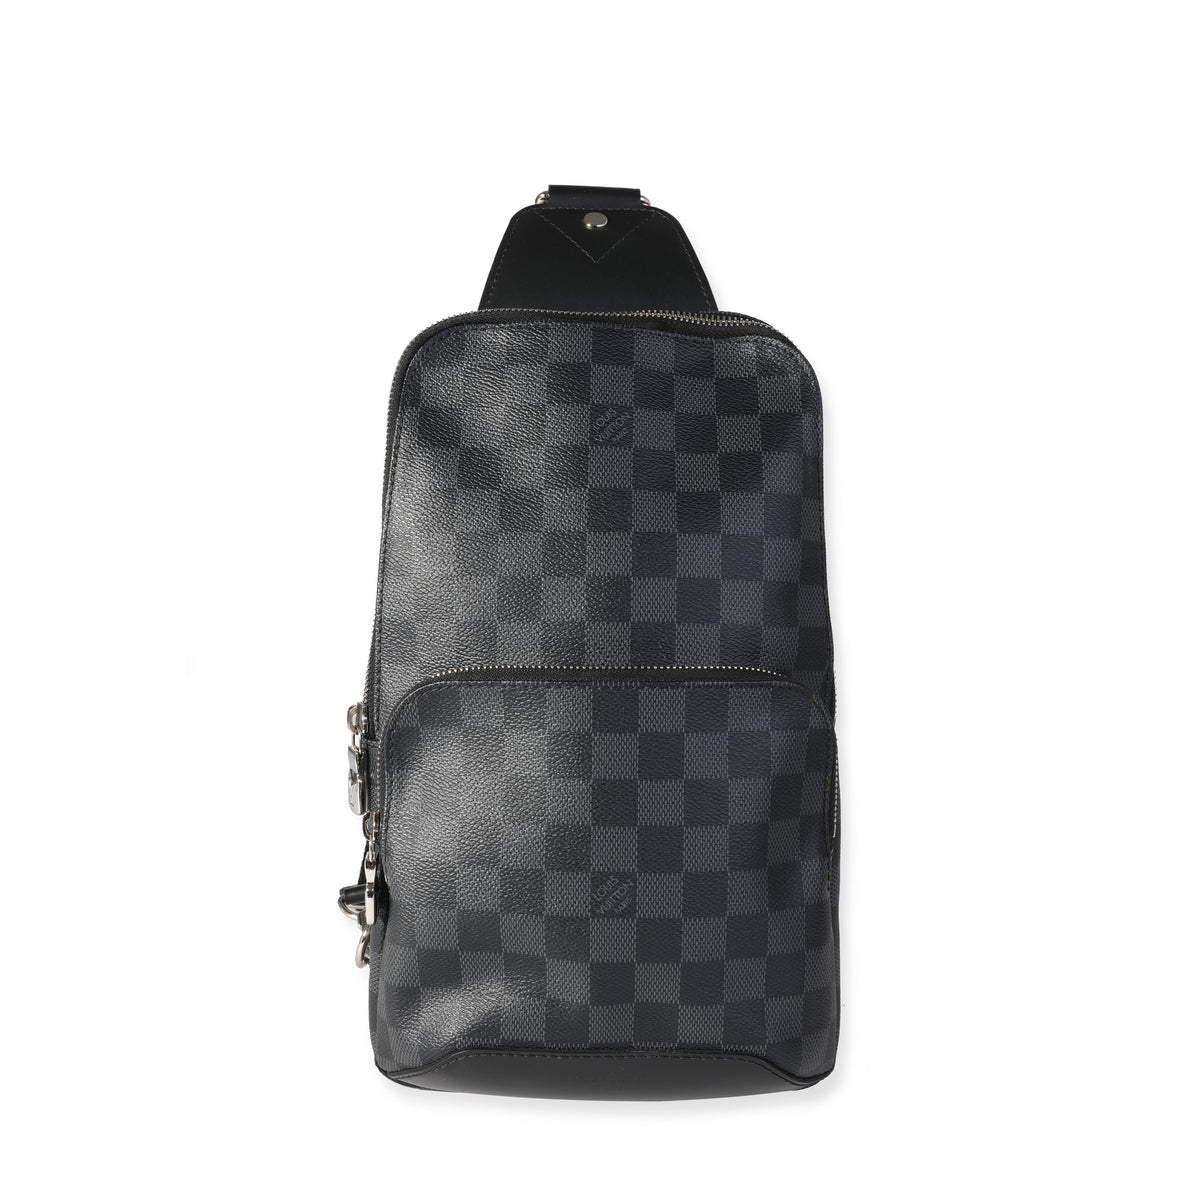 Authenticated Used LOUIS VUITTON Damier Graphite Avenue, 58% OFF